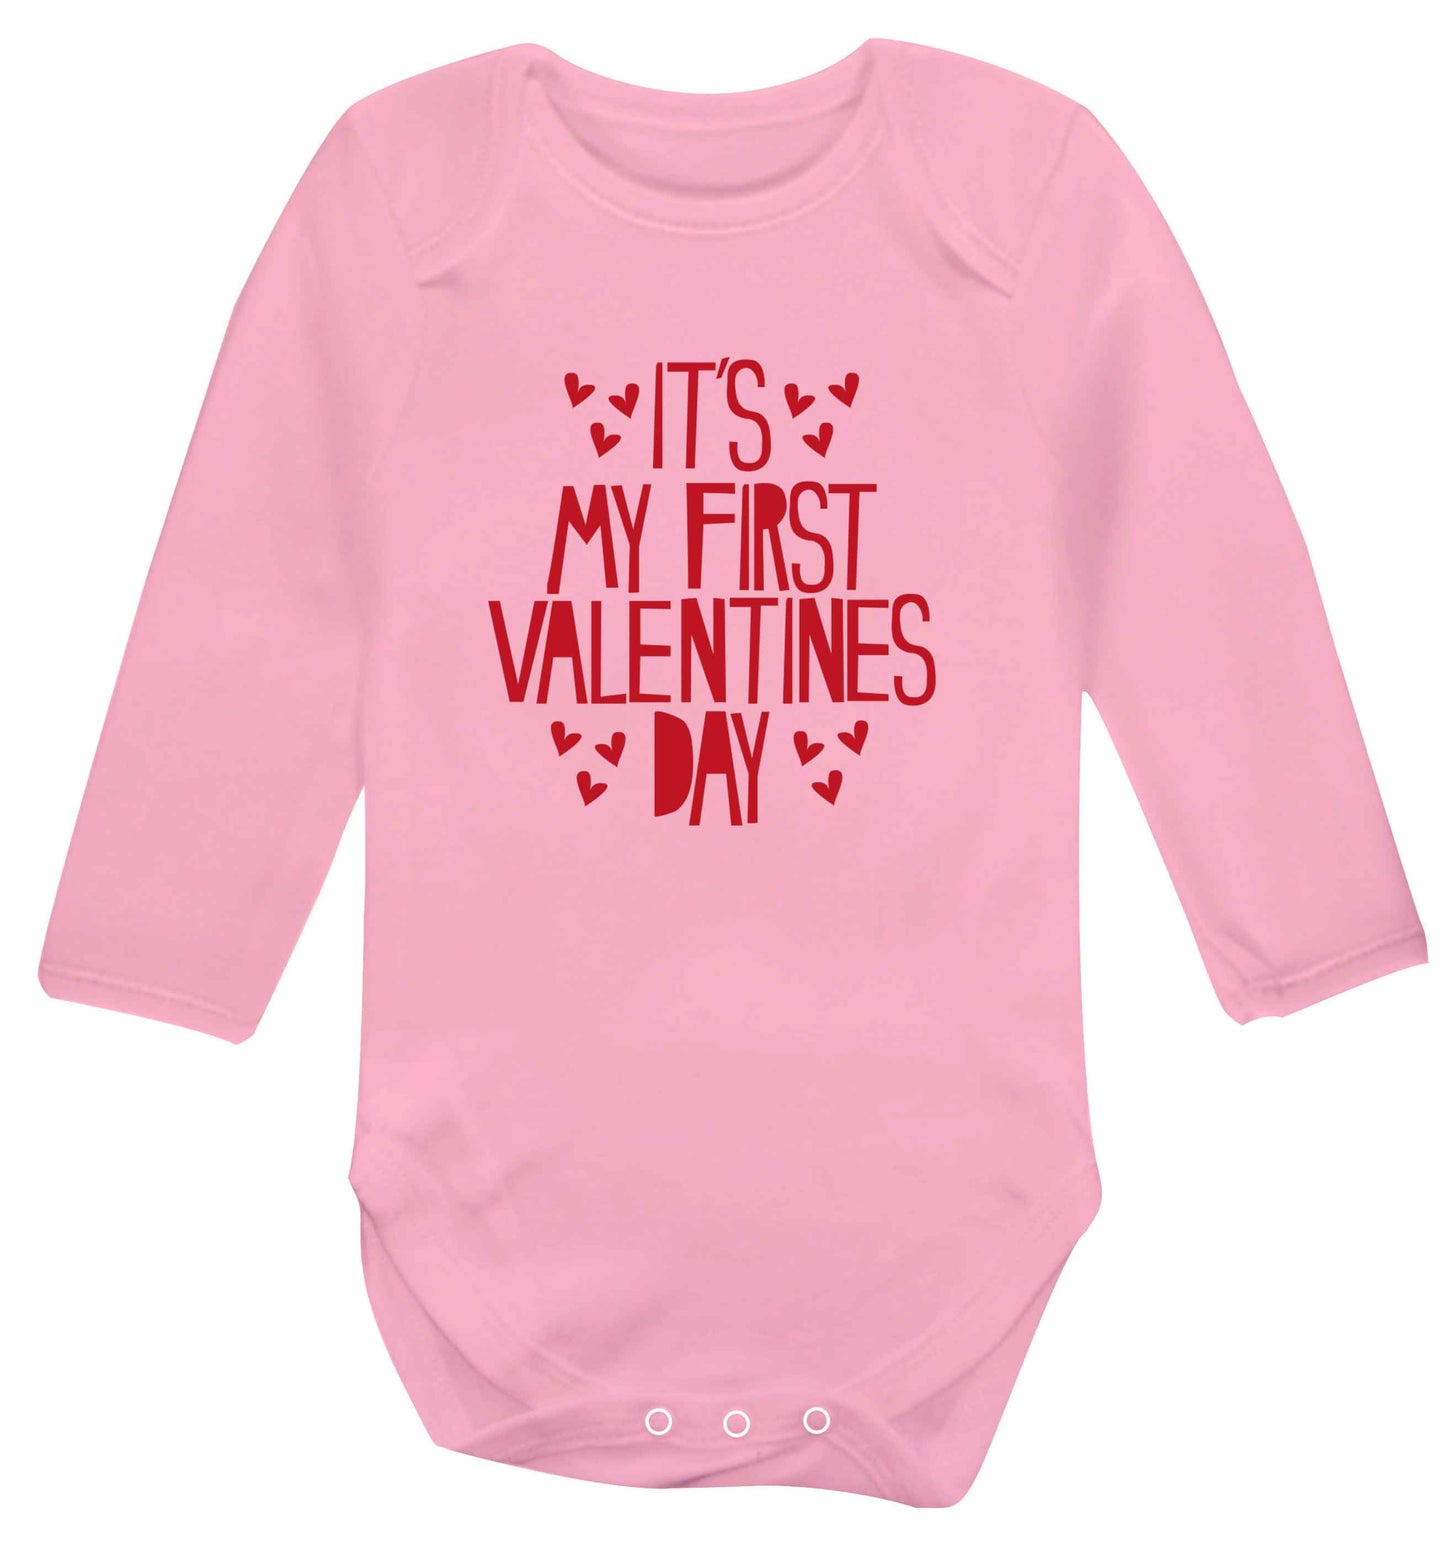 Hearts It's my First Valentine's Day baby vest long sleeved pale pink 6-12 months